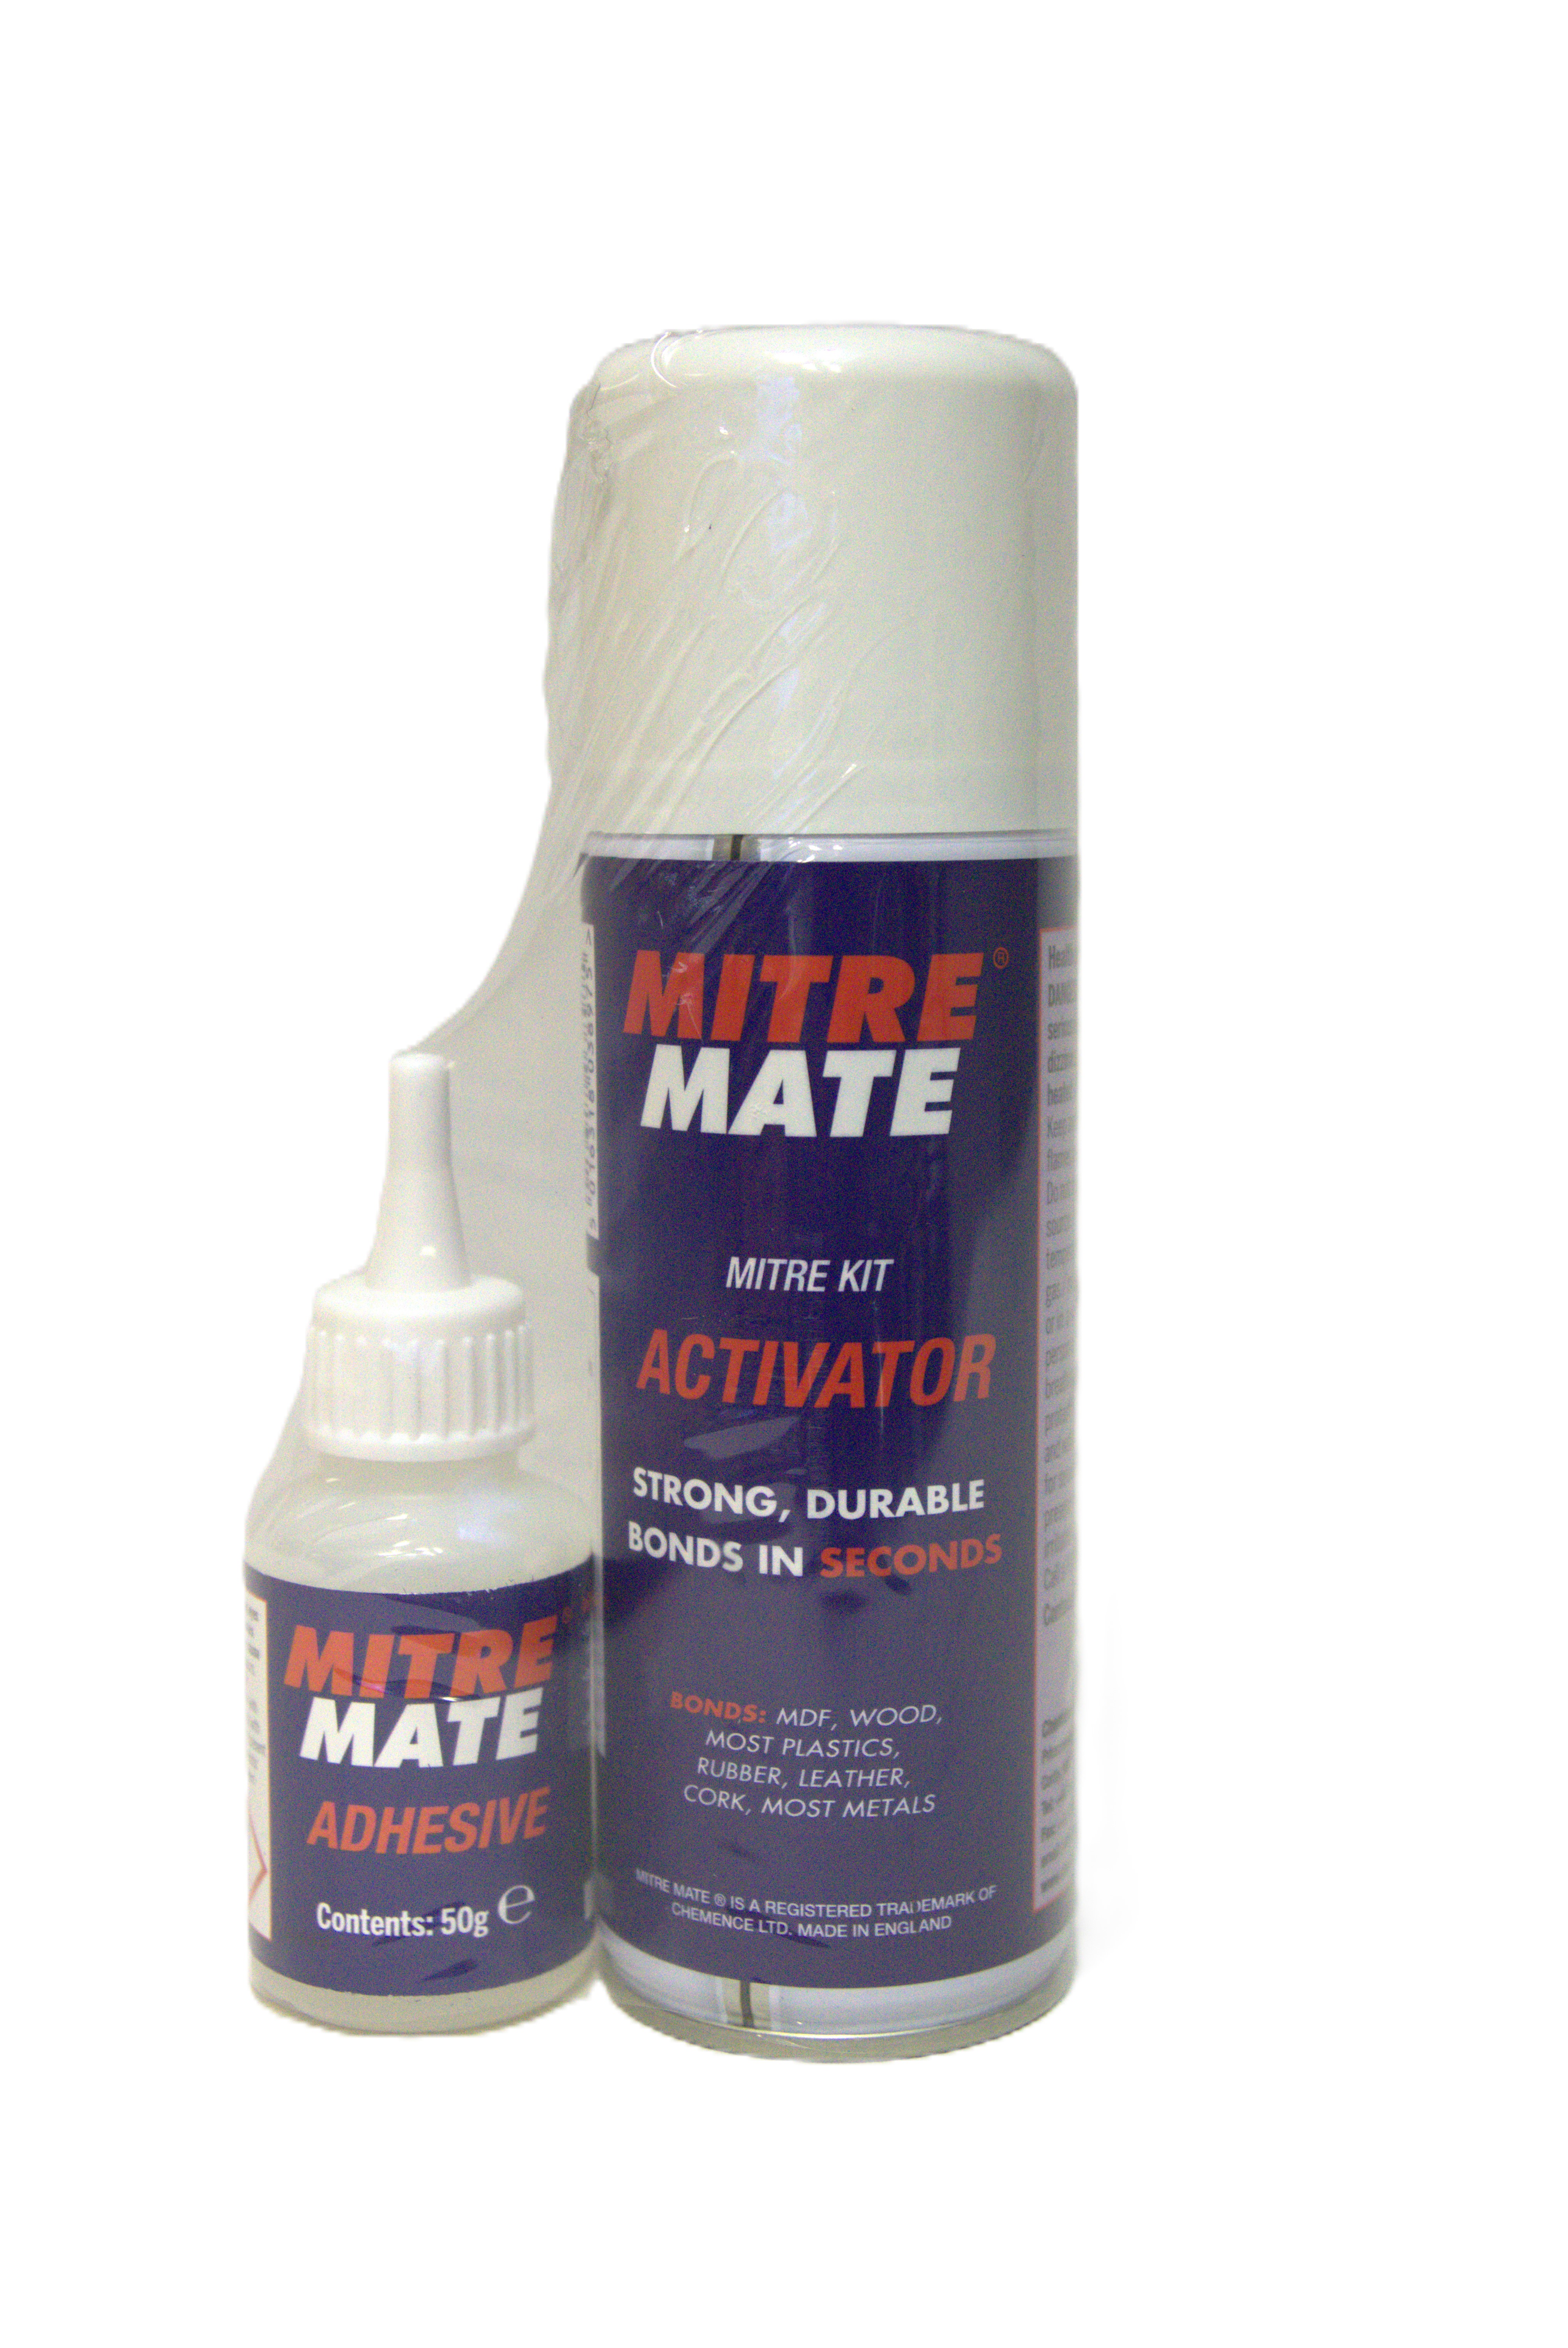 Mitre-Mate Cyanocrylate Adhesive - 50g (incl. activator) Superglue - Pack of 6